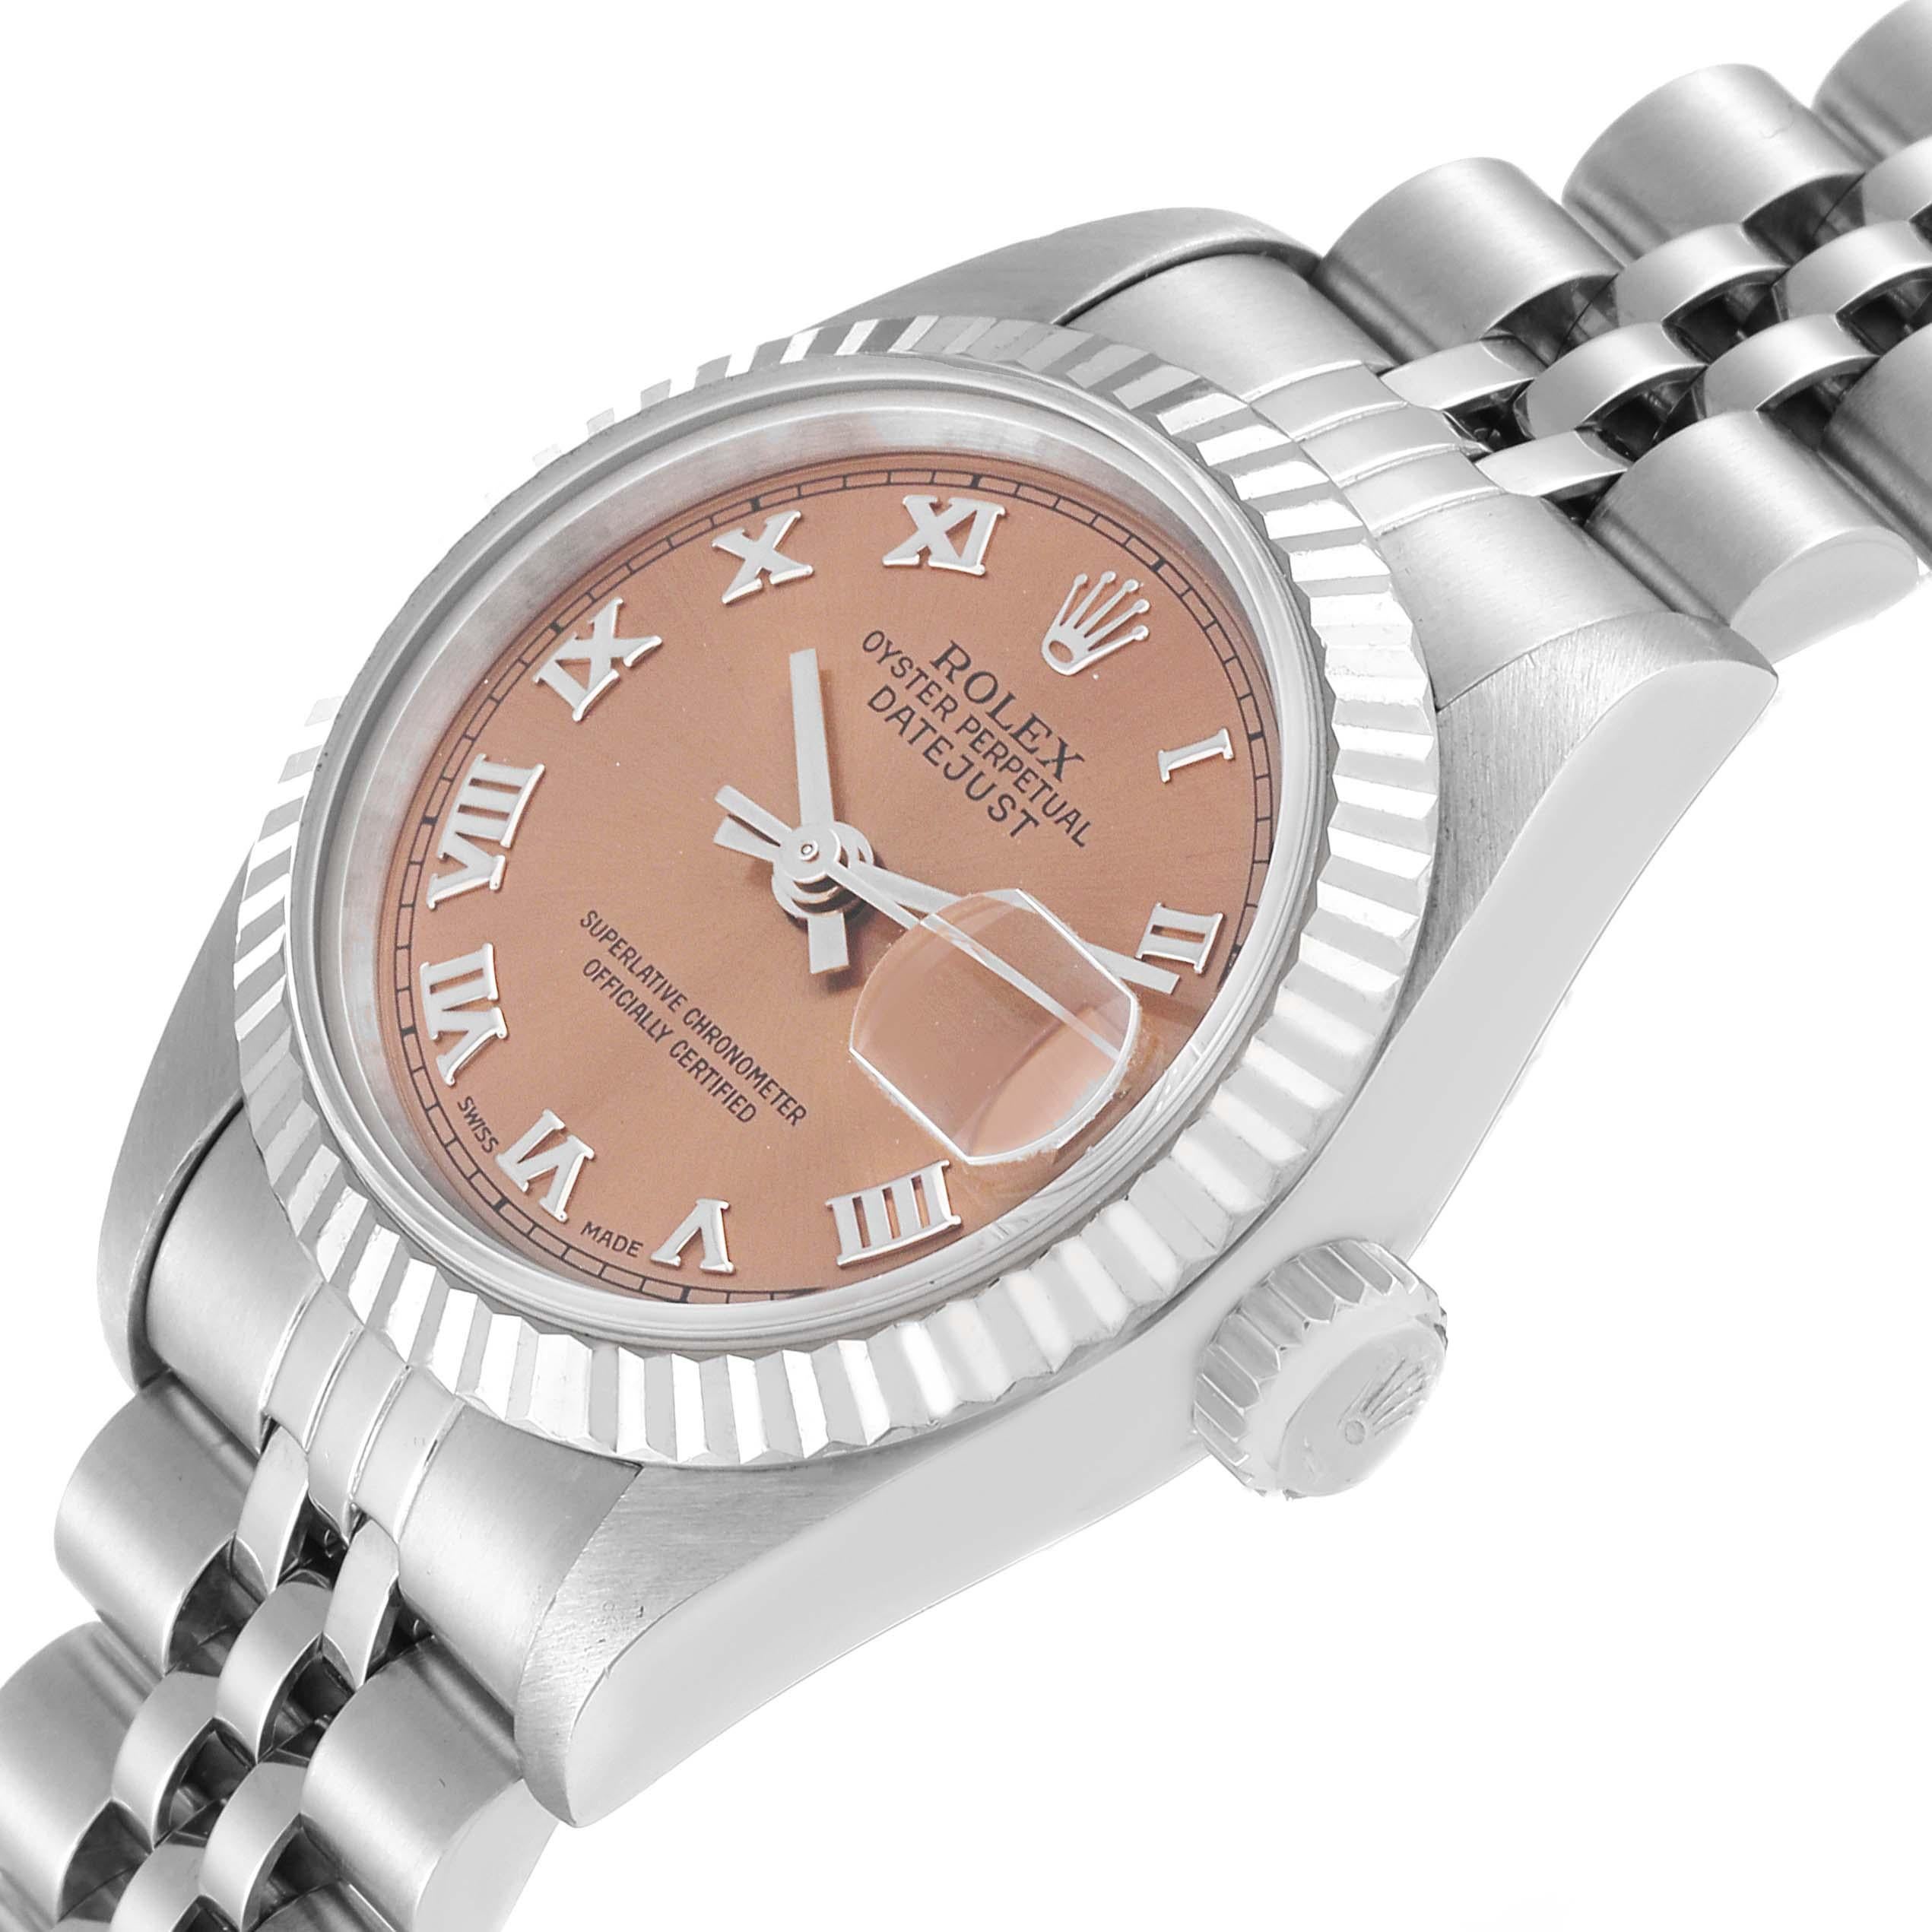 Rolex Datejust Steel White Gold Salmon Dial Ladies Watch 69174 Box Papers 1